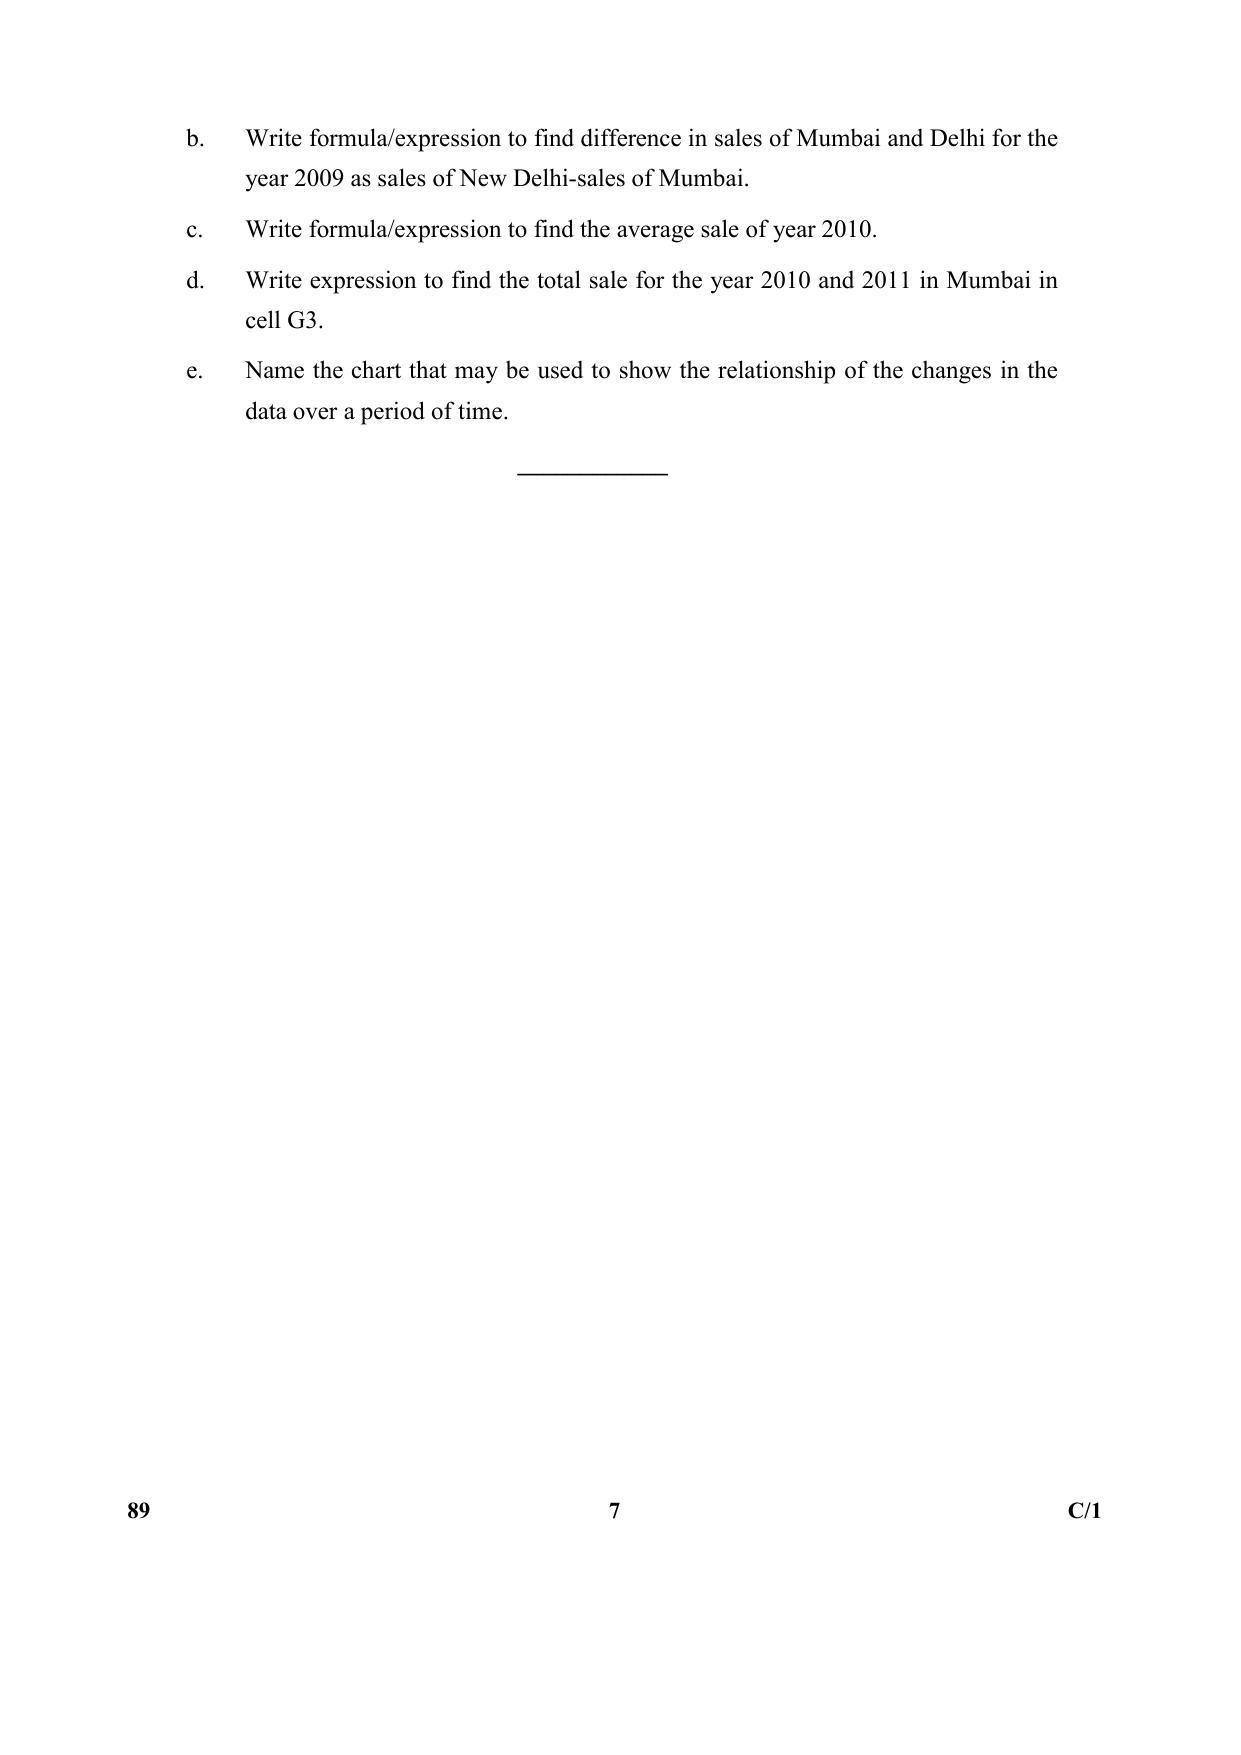 CBSE Class 10 89 (Information Technology) 2018 Compartment Question Paper - Page 7